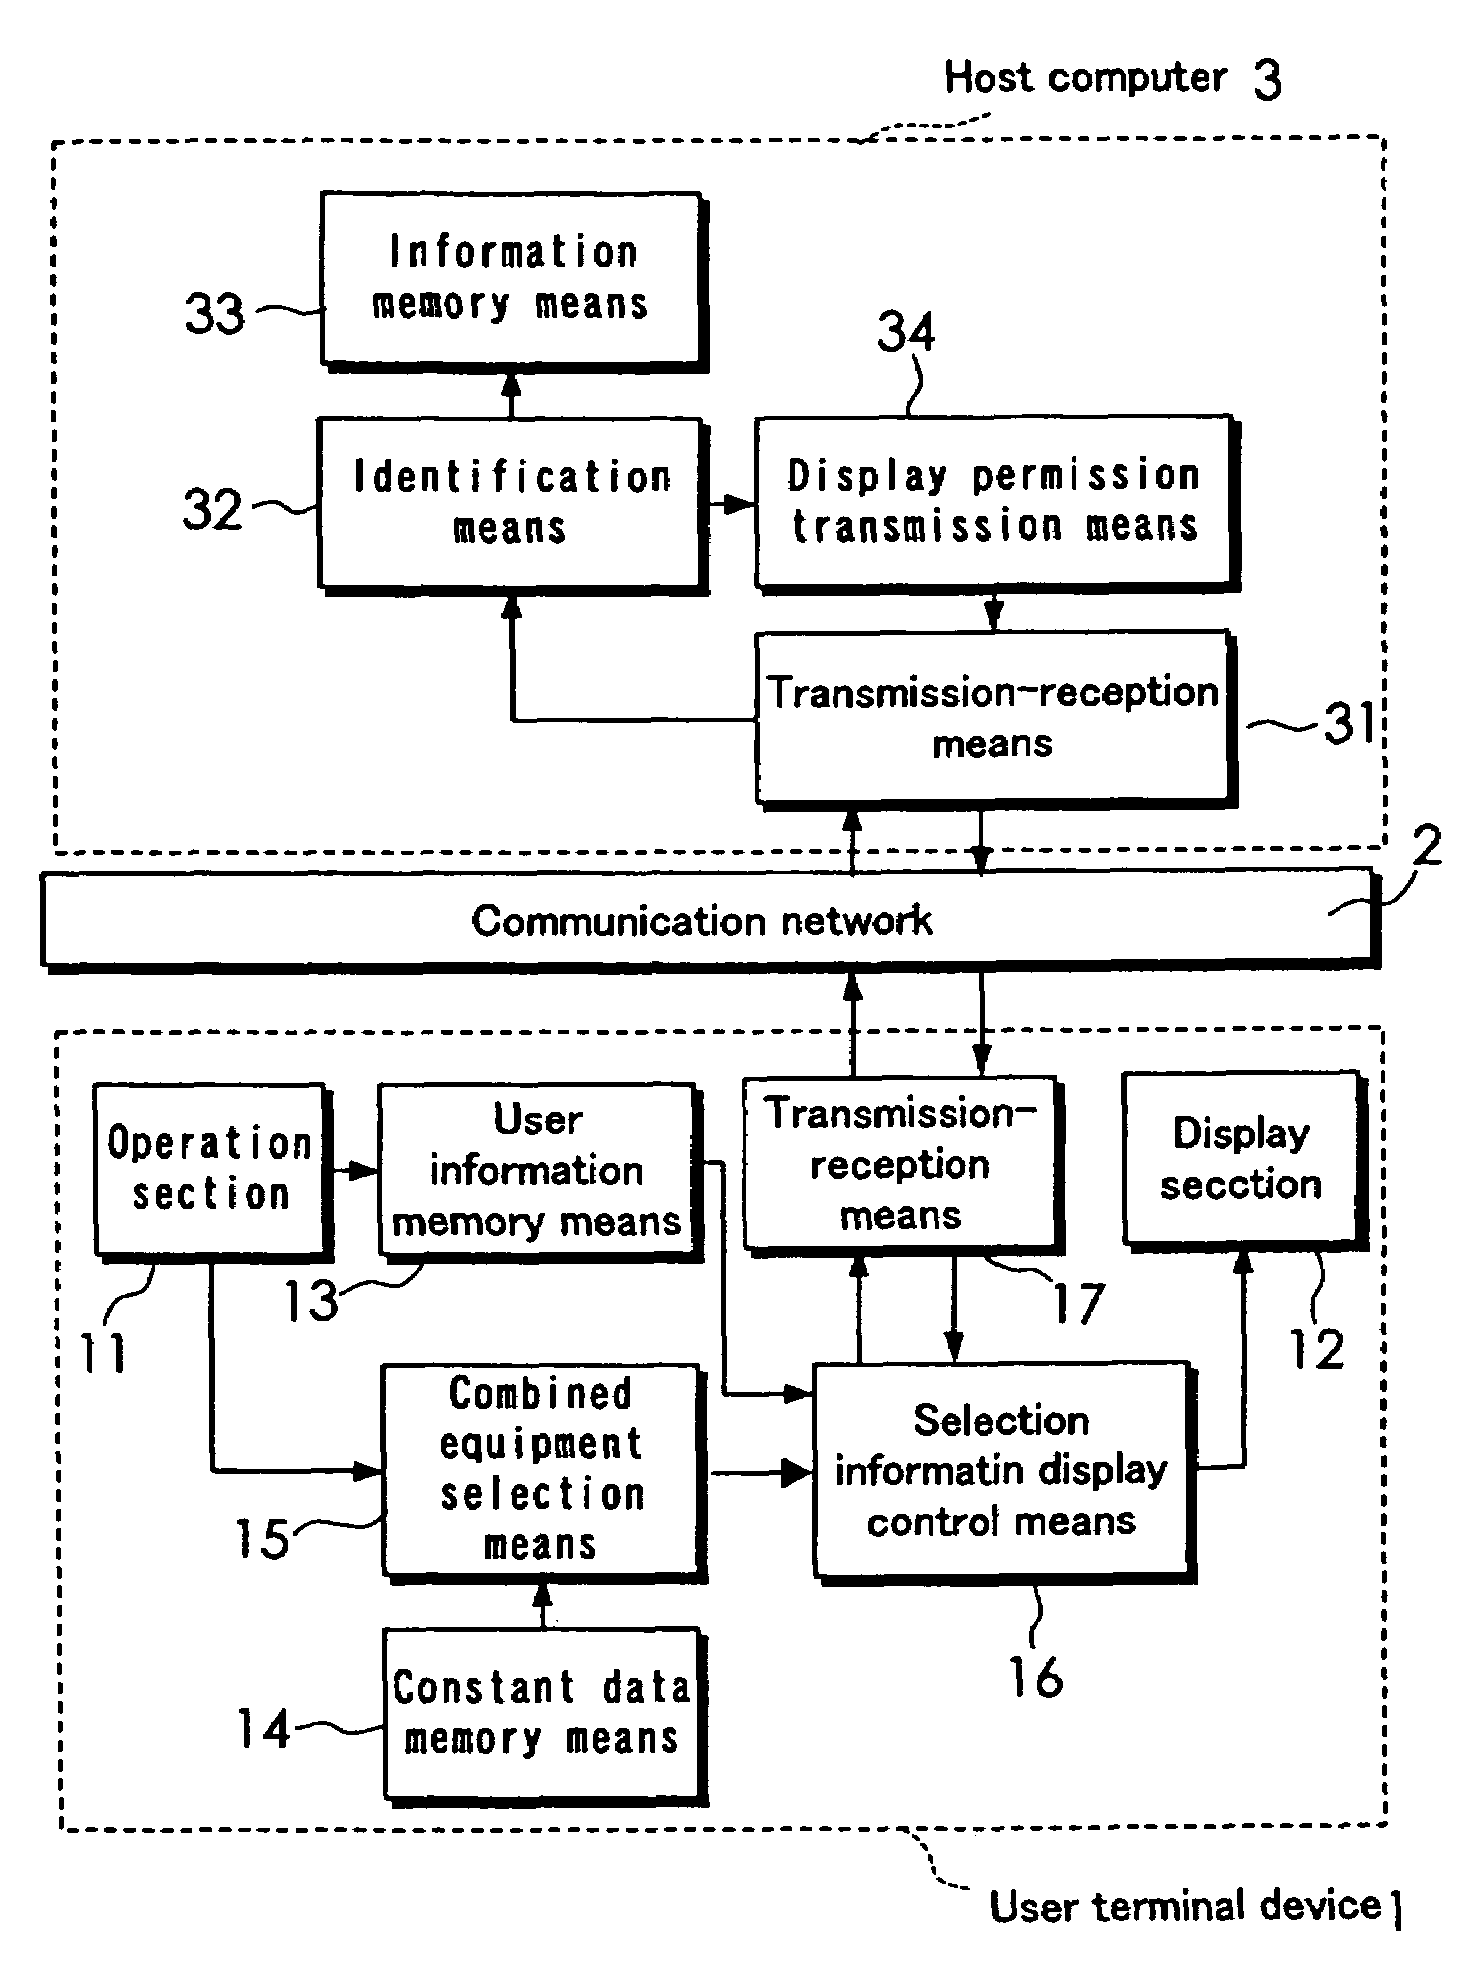 Combination equipment selection system using network